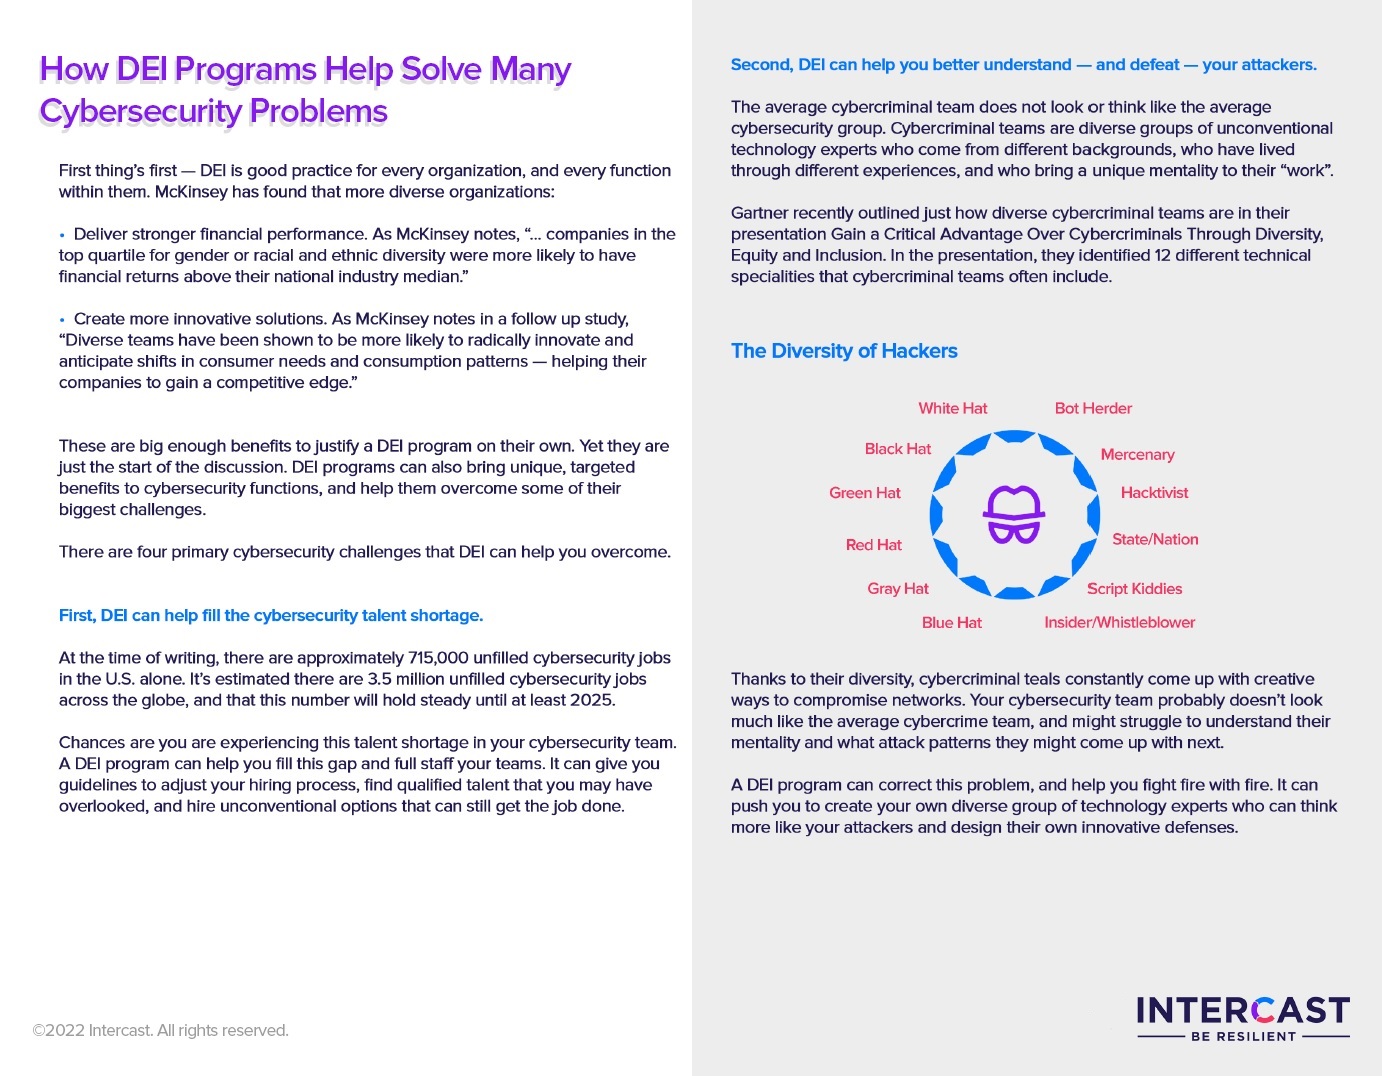 How DEI Programs Help Solve Many Cybersecurity Problems by Intercast 